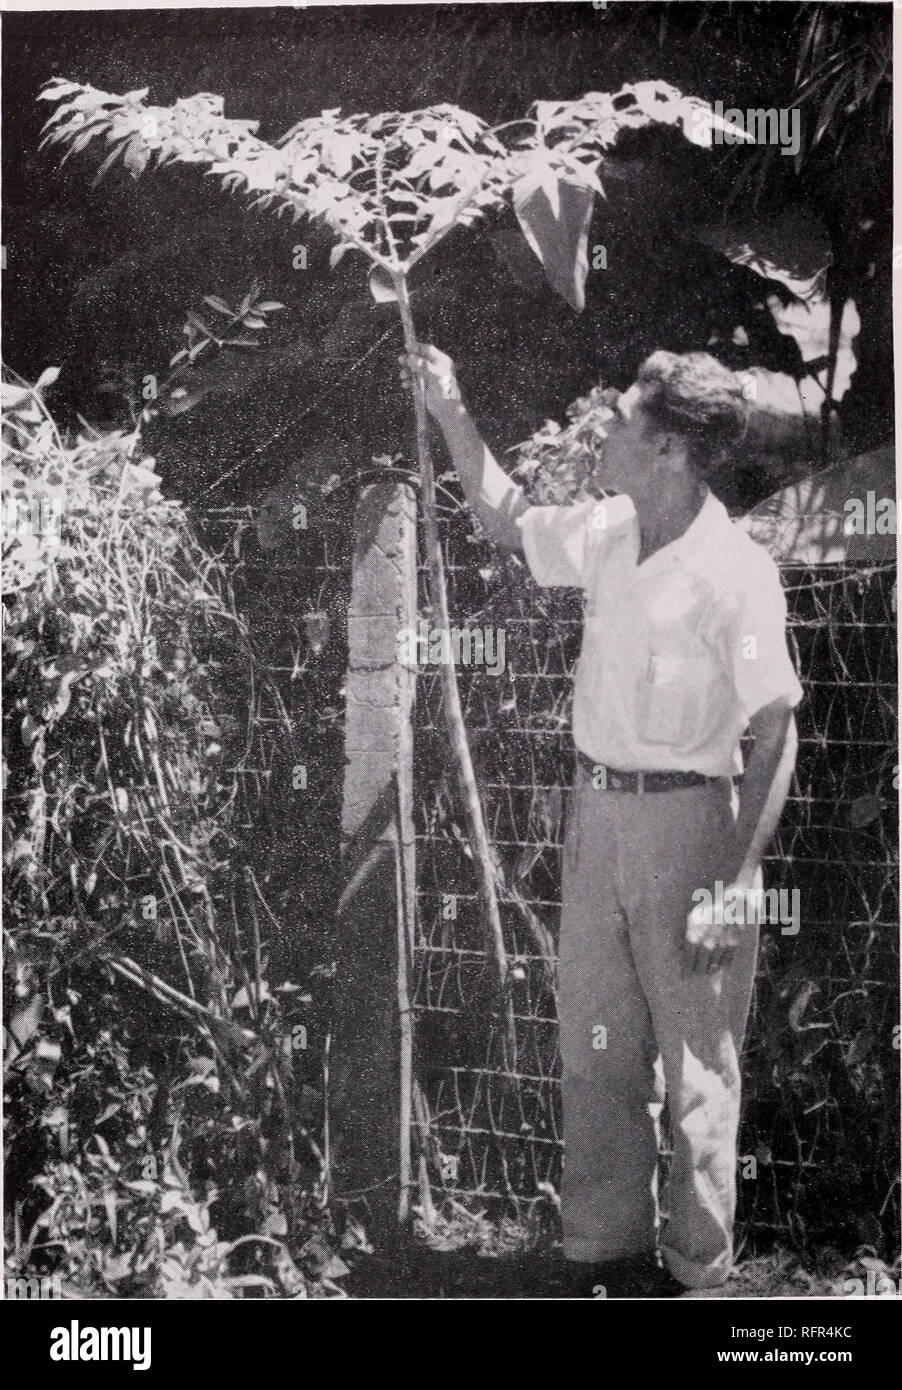 . Some large-leaved ornamental plants for the tropics. Plants, Ornamental; Tropical plants. 50 CIRCULAR 35, FEDERAL EXPERIMENT STATION. Figure 33.—The foliage of Dracontium yolyphyllum may reach a height of 6 feet during the rainy season. banded or margined with white and measure y2 to IV2 inches wide and 6 to 10 inches long. The plants produce their best foliage effect in semishade as strong sunshine causes burning of the white parts of the leaf. Rich moist soil throughout the year is preferred,. Please note that these images are extracted from scanned page images that may have been digitally Stock Photo